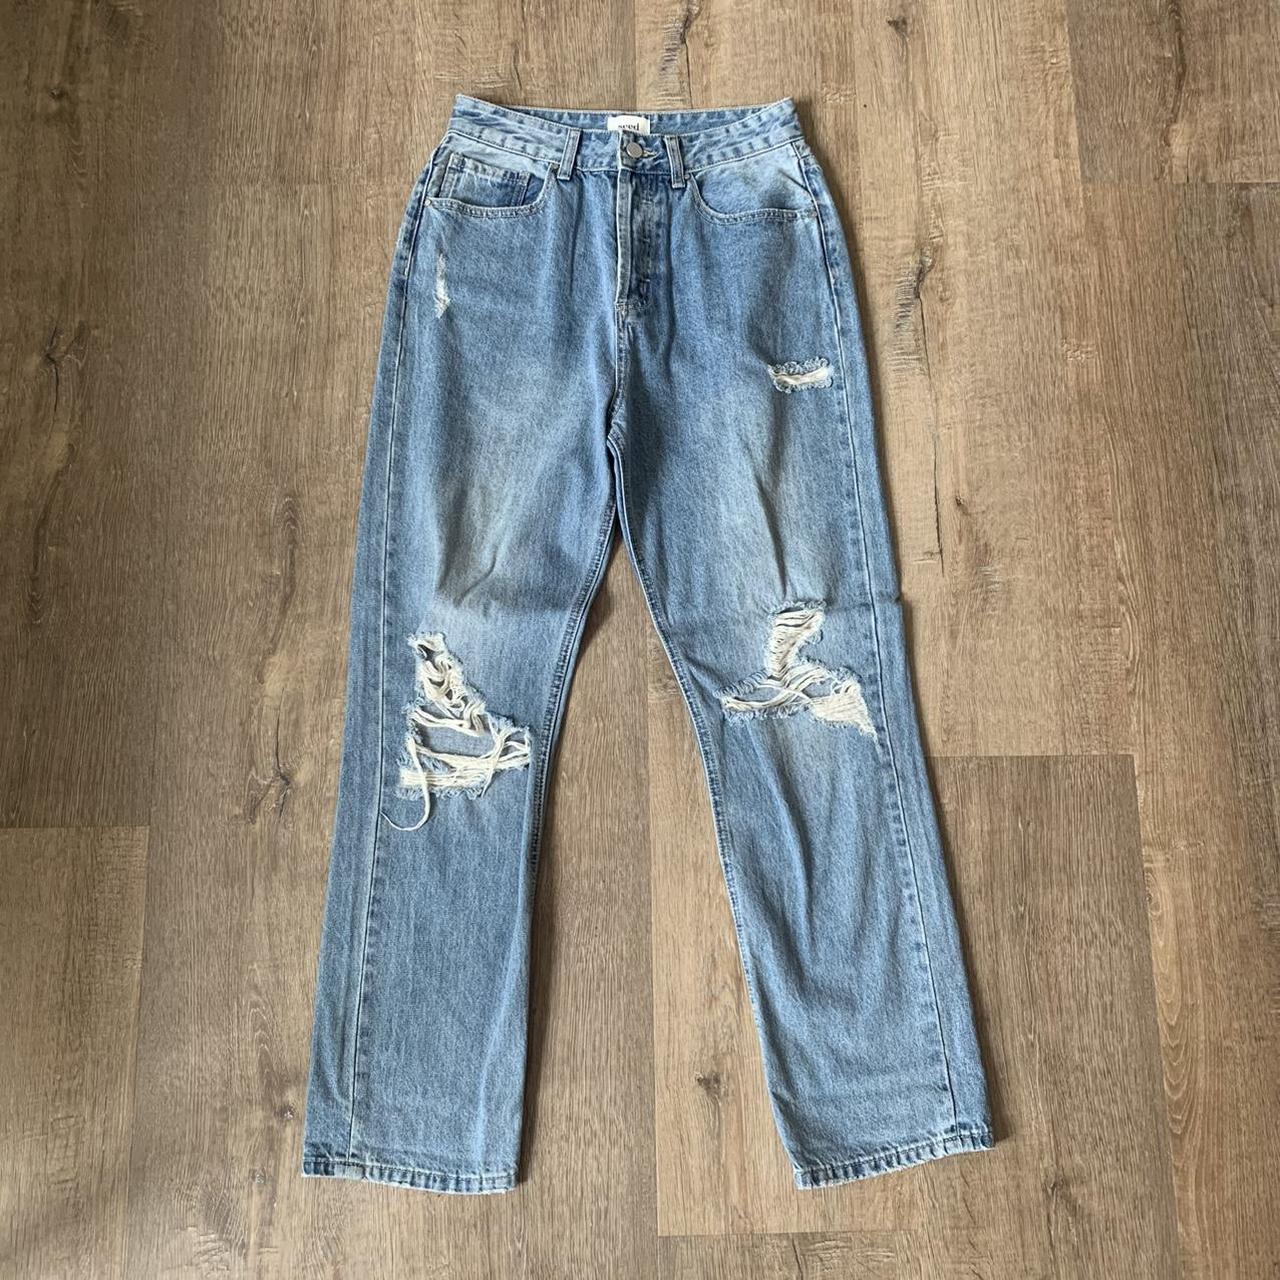 Seed Heritage Women's White and Blue Jeans | Depop